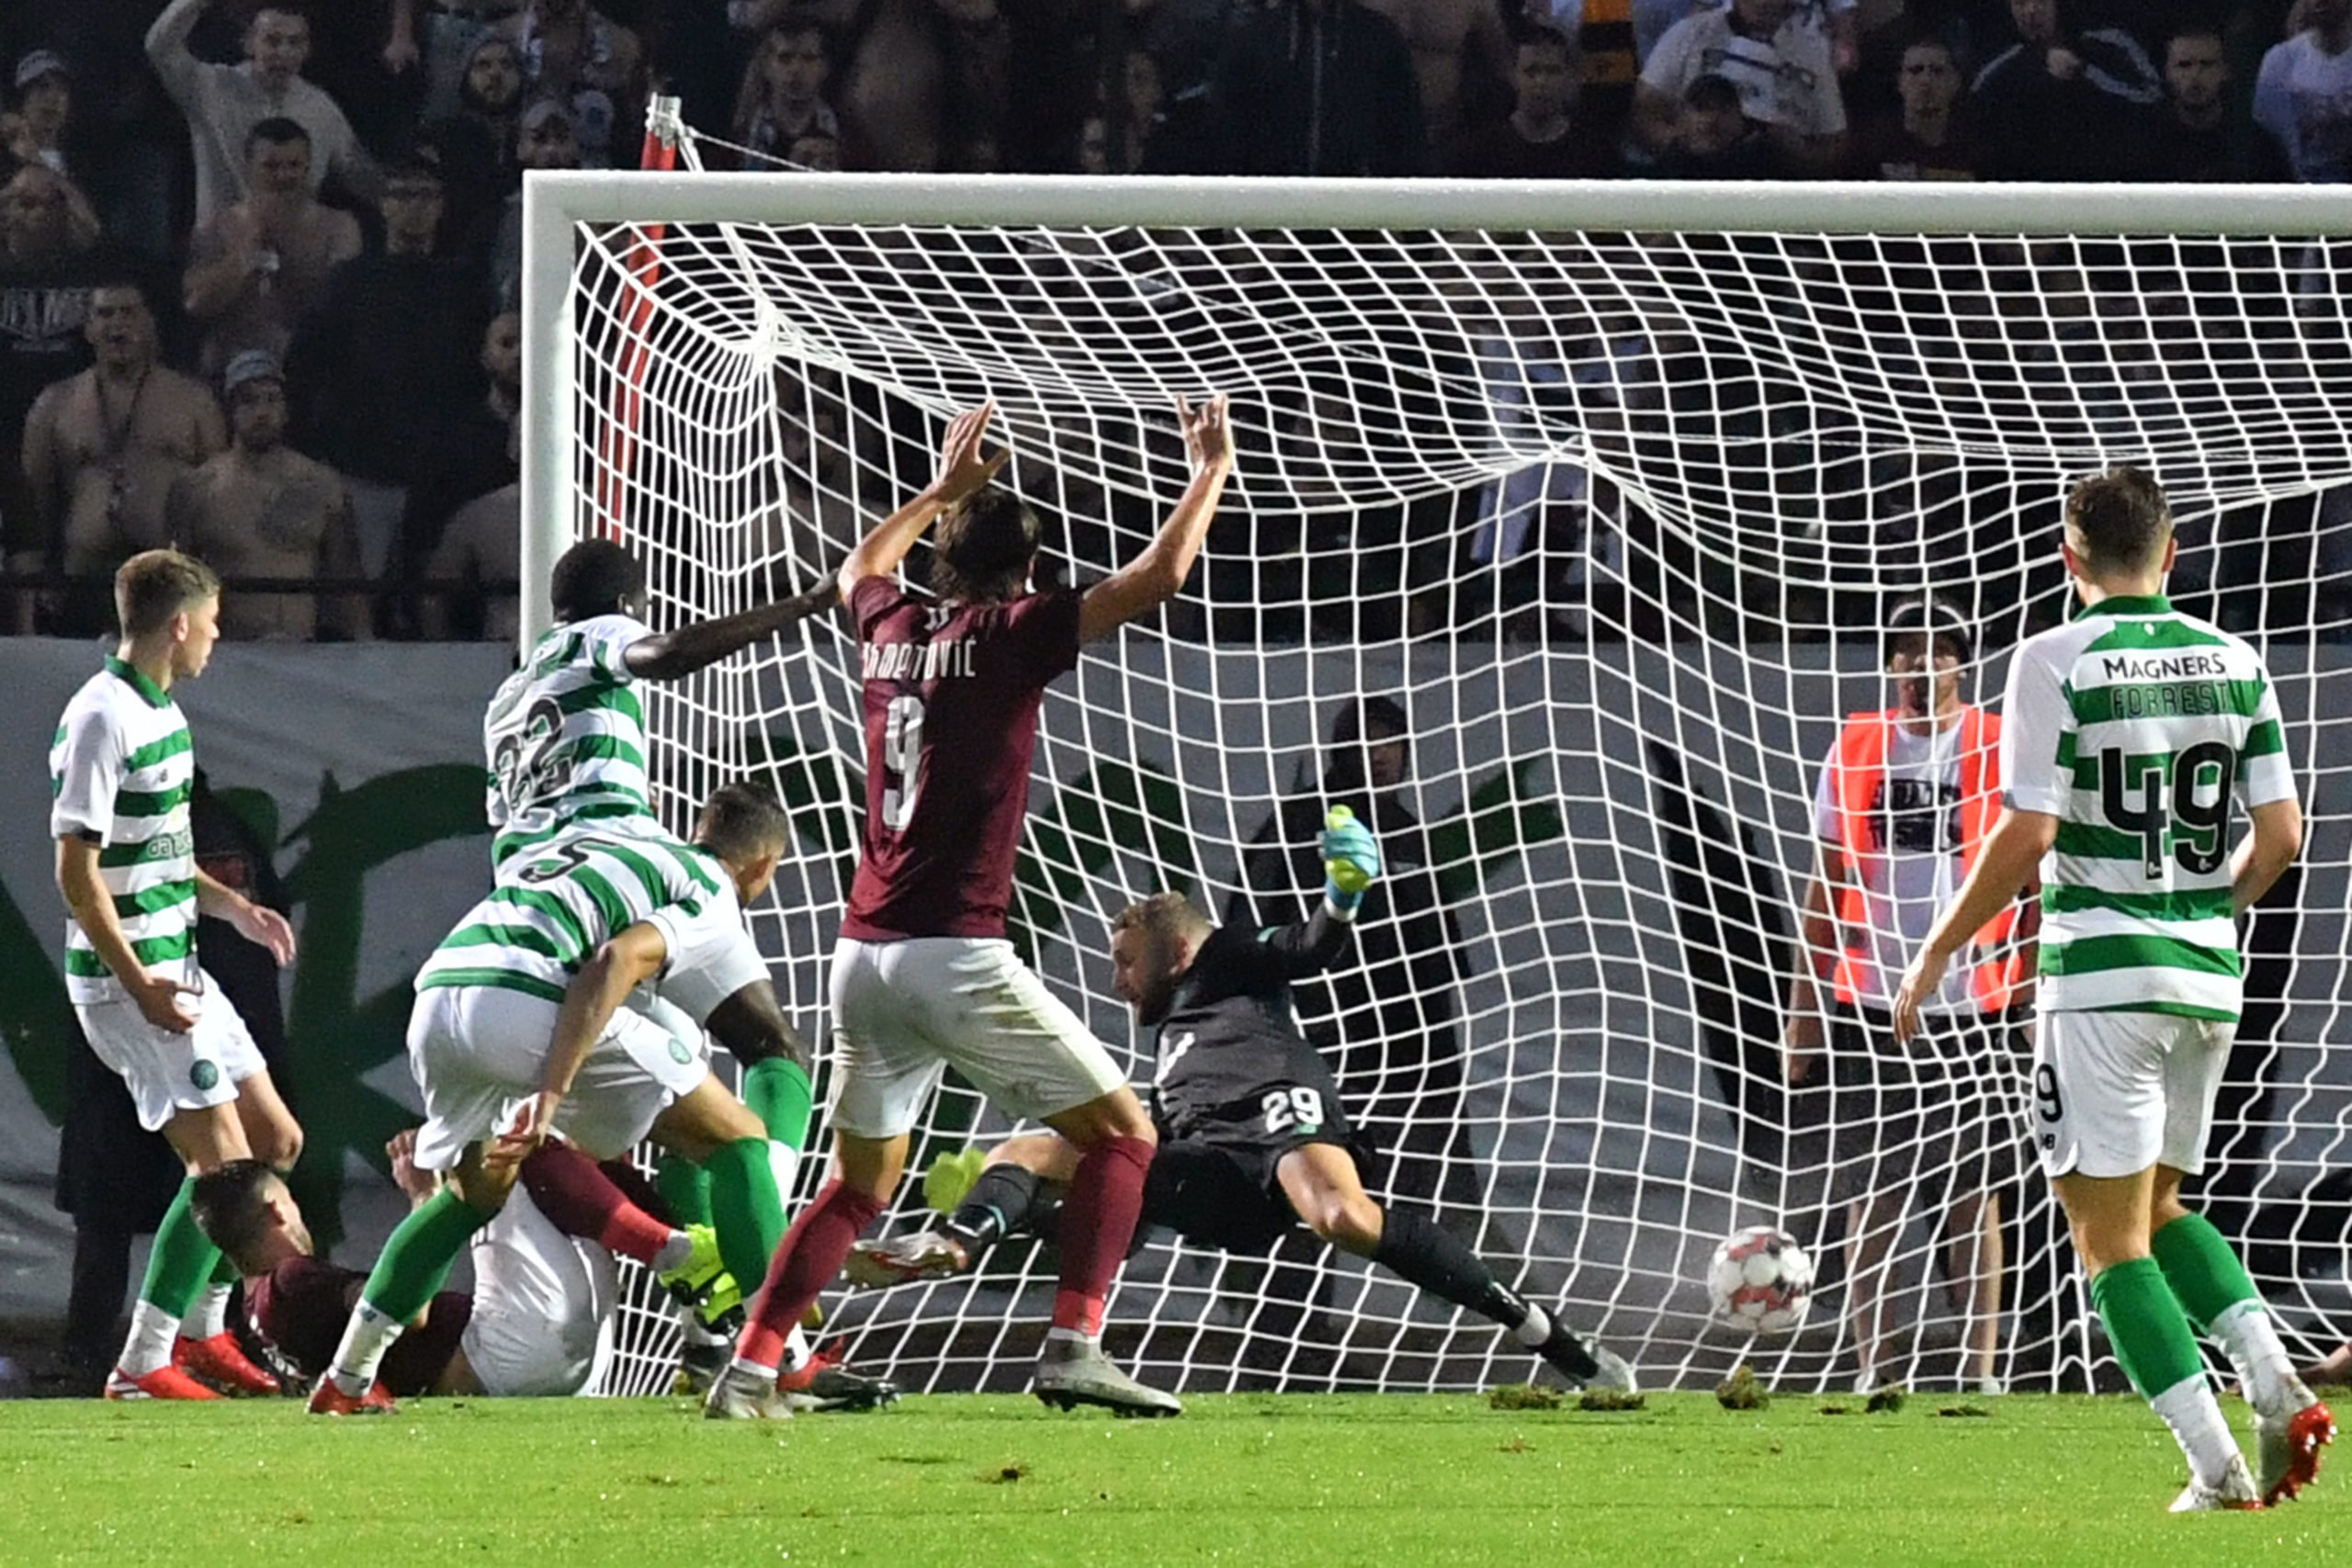 Sarajevo boss drums up Celtic clash; praises our "special history"